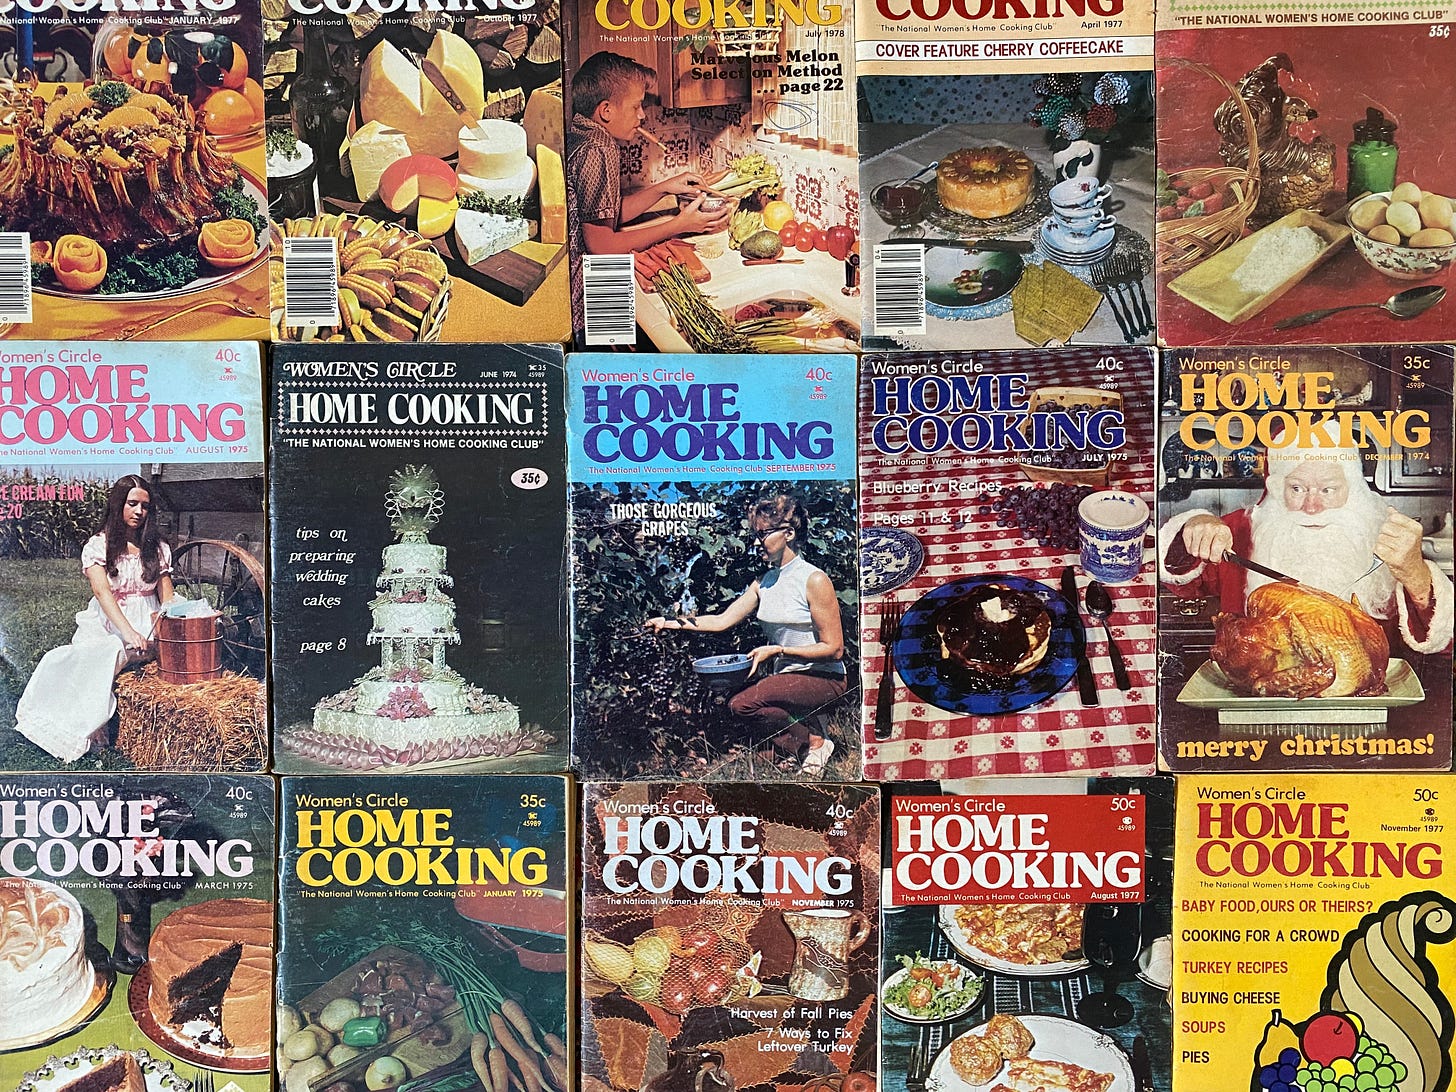 Issues of Women's Circle Home Cooking magazine.